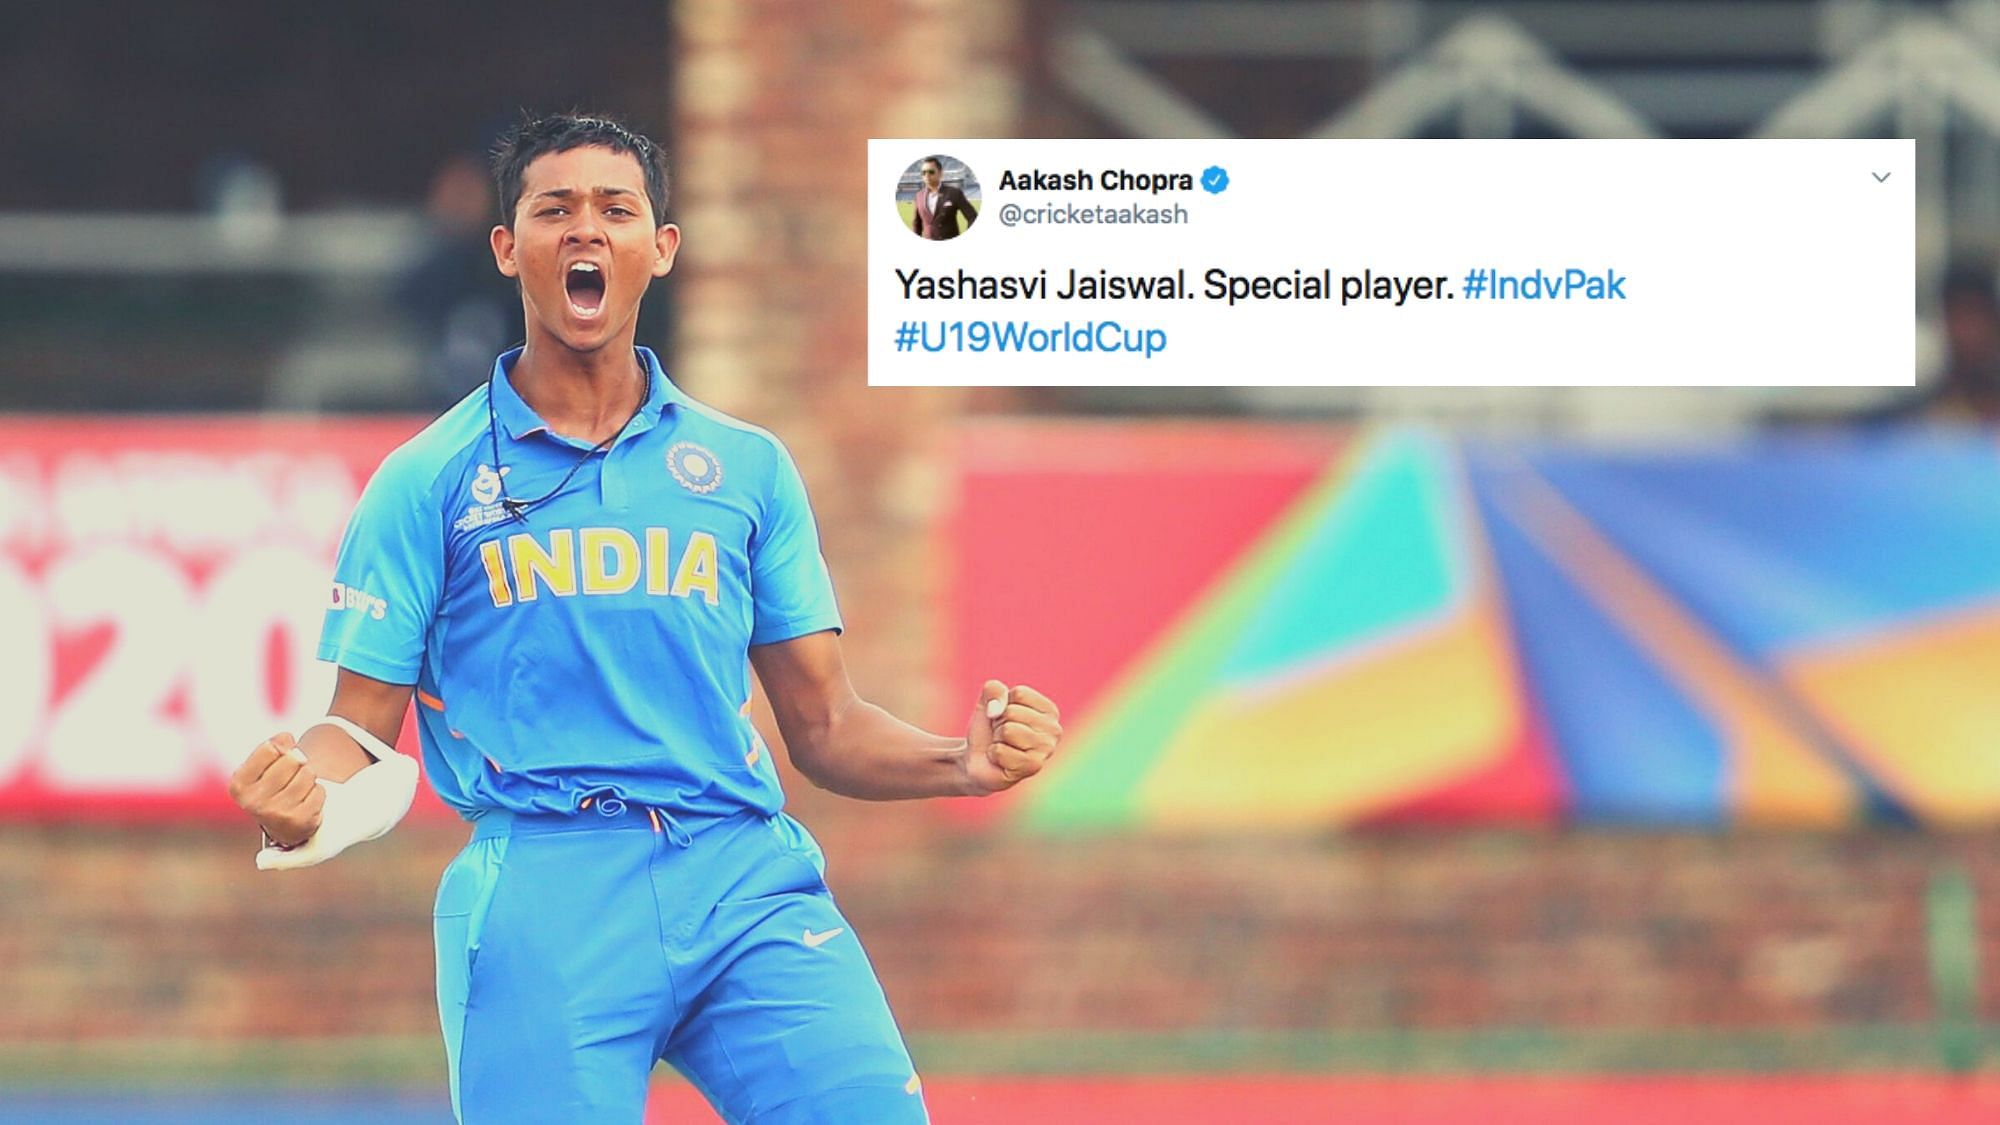 Twitter hailed opener Yashasvi Jaiswal for his incredible century that helped India book a spot in the final of the U-19 World Cup.